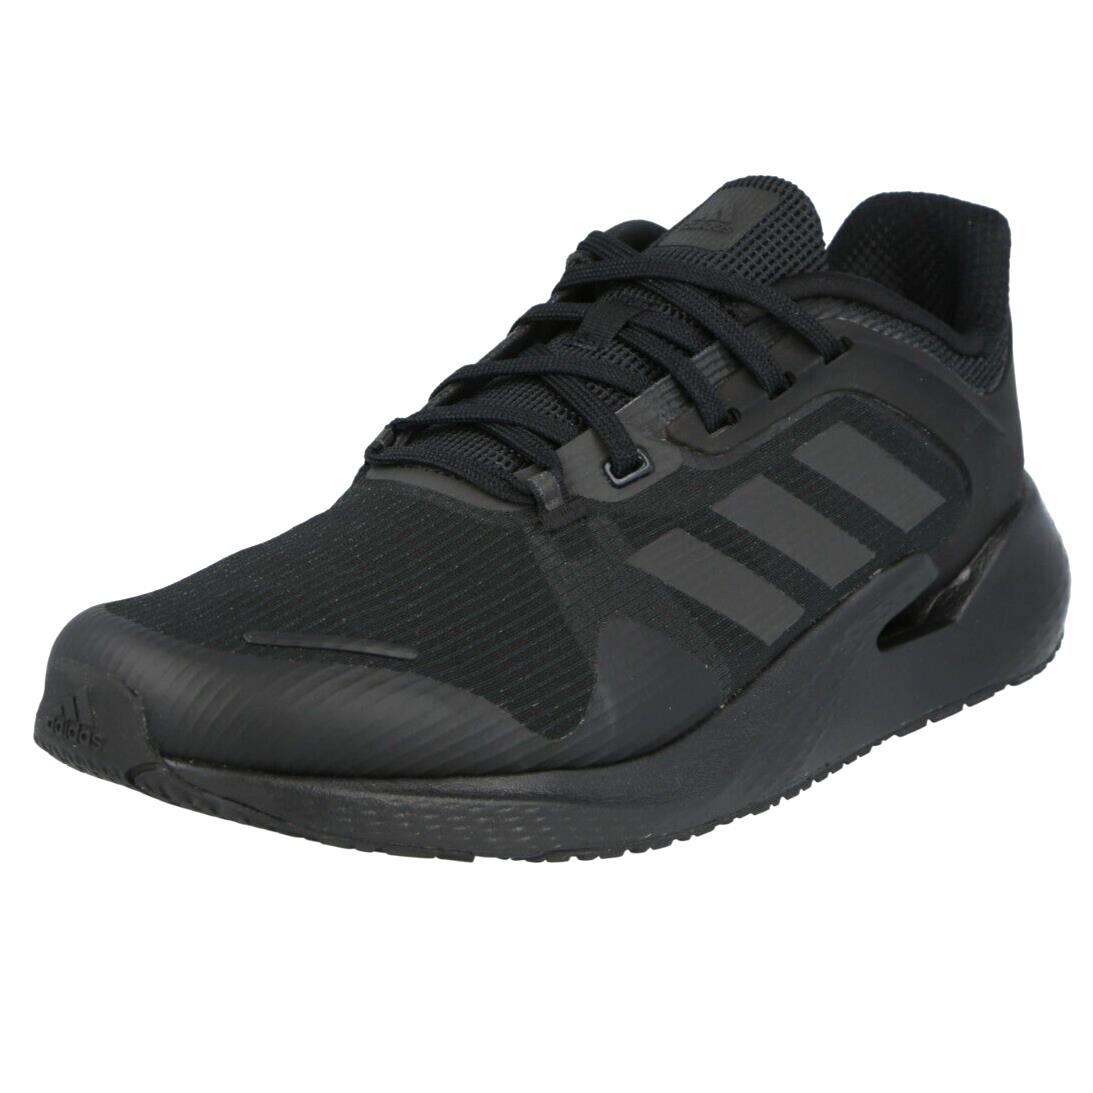 Adidas Mens Alphatorsion Trainers Running Shoes - Black 11